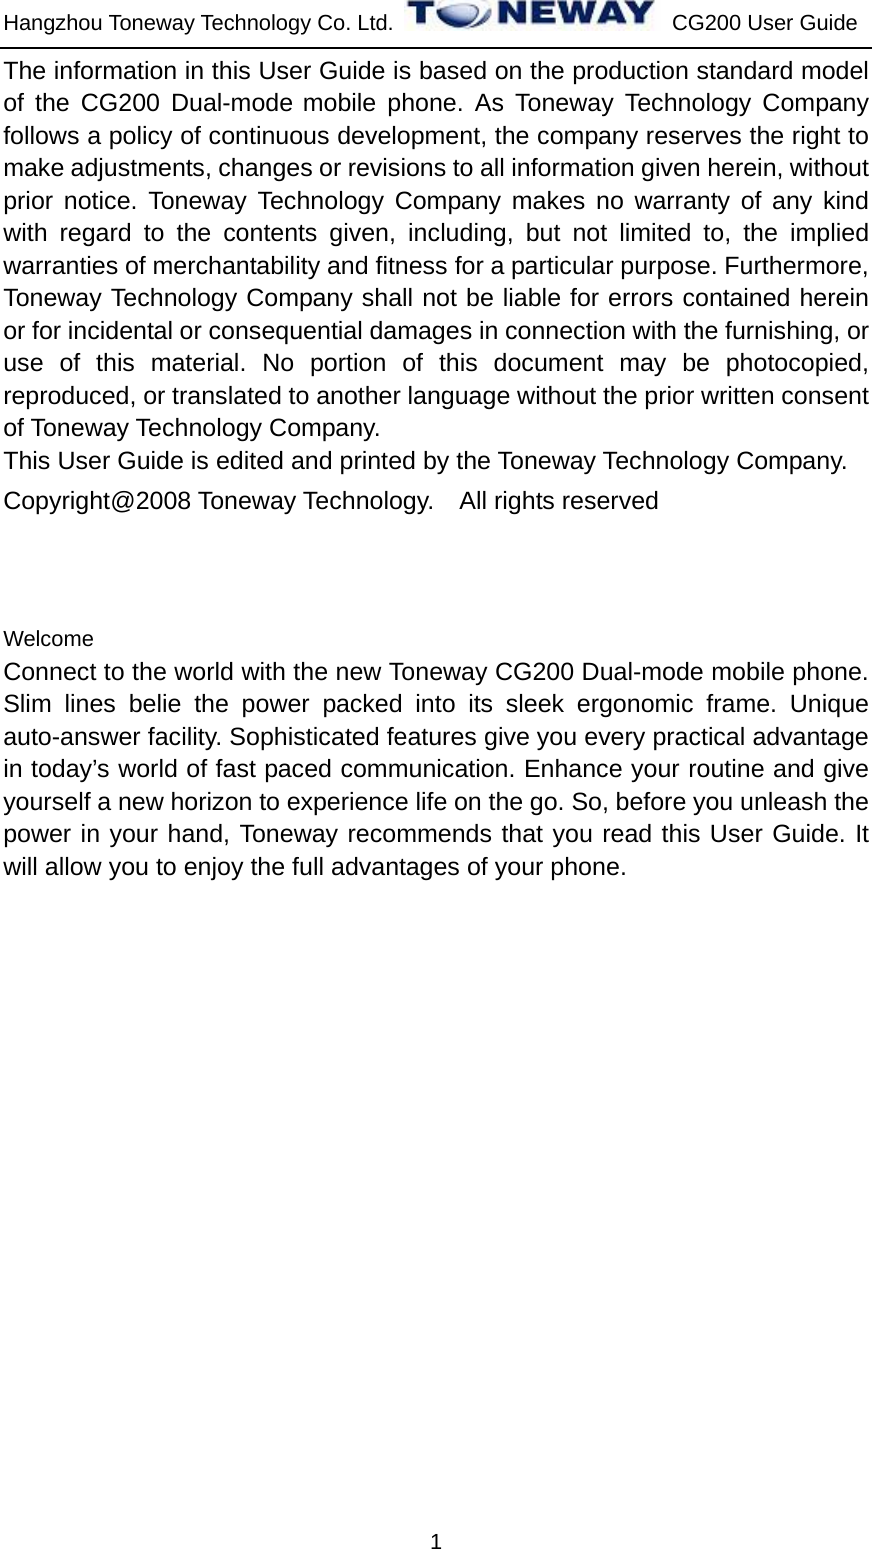 Hangzhou Toneway Technology Co. Ltd.    CG200 User Guide 1 The information in this User Guide is based on the production standard model of the CG200 Dual-mode mobile phone. As Toneway Technology Company follows a policy of continuous development, the company reserves the right to make adjustments, changes or revisions to all information given herein, without prior notice. Toneway Technology Company makes no warranty of any kind with regard to the contents given, including, but not limited to, the implied warranties of merchantability and fitness for a particular purpose. Furthermore, Toneway Technology Company shall not be liable for errors contained herein or for incidental or consequential damages in connection with the furnishing, or use of this material. No portion of this document may be photocopied, reproduced, or translated to another language without the prior written consent of Toneway Technology Company. This User Guide is edited and printed by the Toneway Technology Company. Copyright@2008 Toneway Technology.    All rights reserved    Welcome Connect to the world with the new Toneway CG200 Dual-mode mobile phone. Slim lines belie the power packed into its sleek ergonomic frame. Unique auto-answer facility. Sophisticated features give you every practical advantage in today’s world of fast paced communication. Enhance your routine and give yourself a new horizon to experience life on the go. So, before you unleash the power in your hand, Toneway recommends that you read this User Guide. It will allow you to enjoy the full advantages of your phone.                    